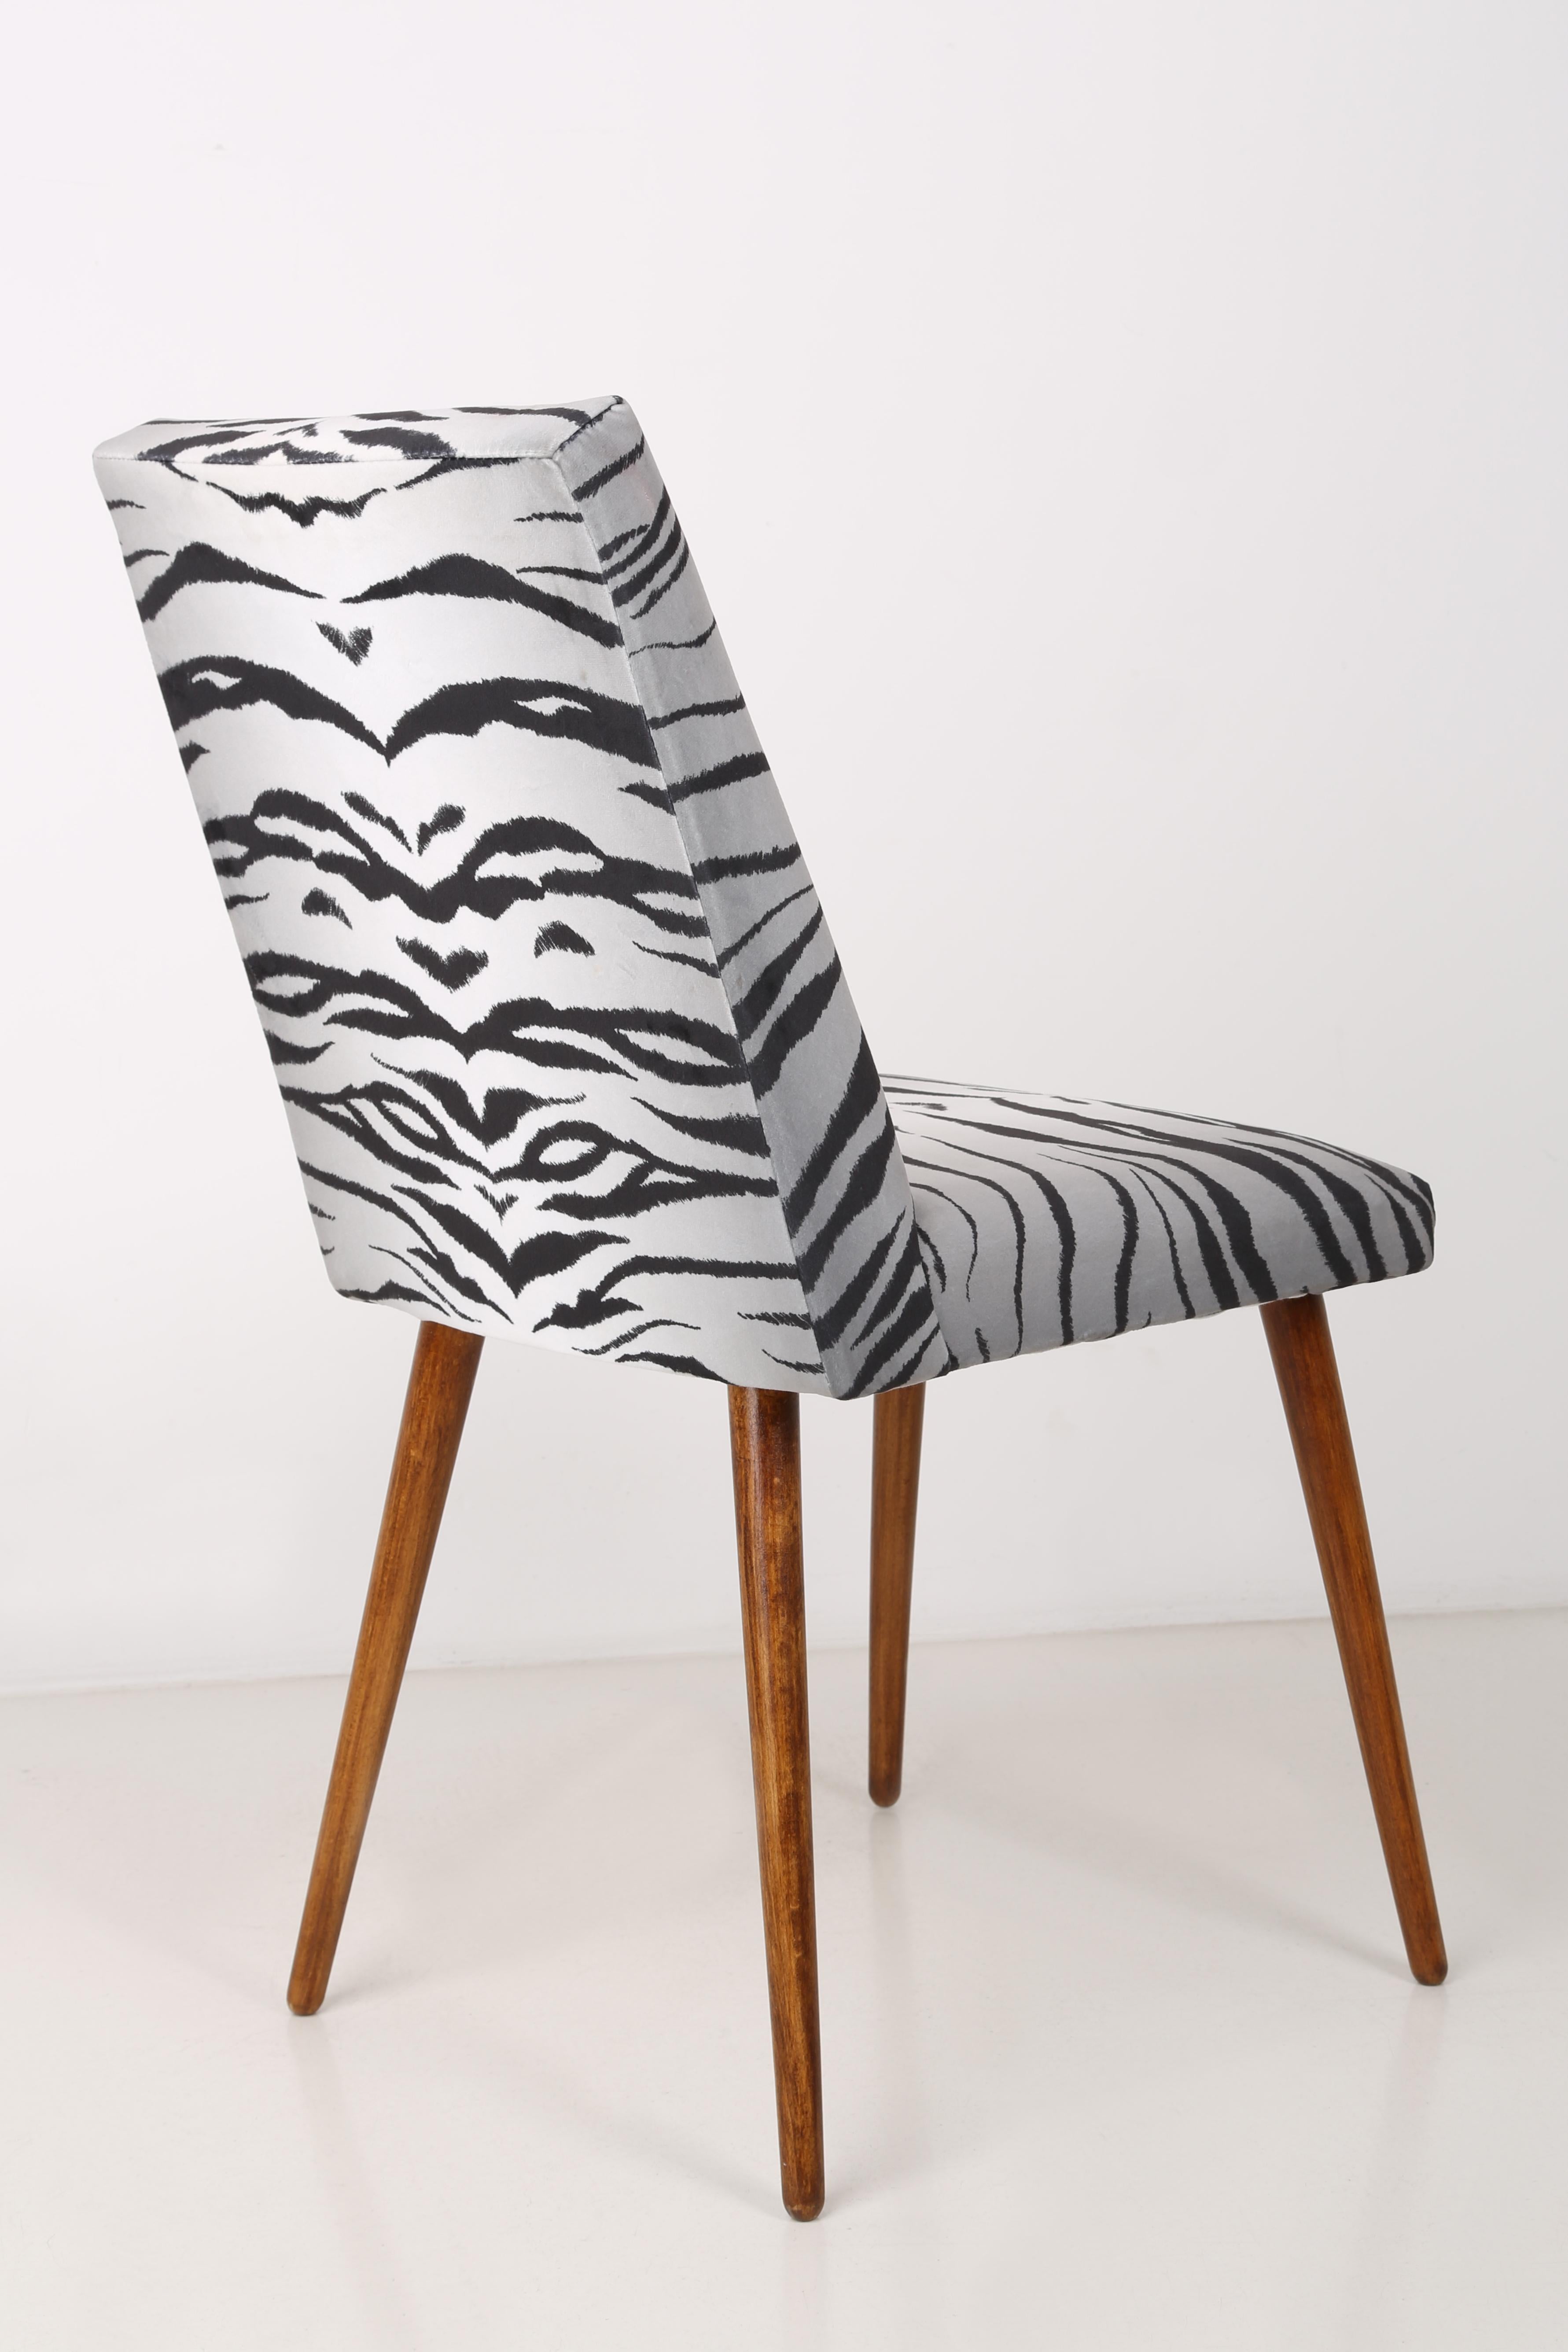 Hand-Crafted Set of Eight 20th Century Black and White Zebra Velvet Chairs, Europe, 1960s For Sale